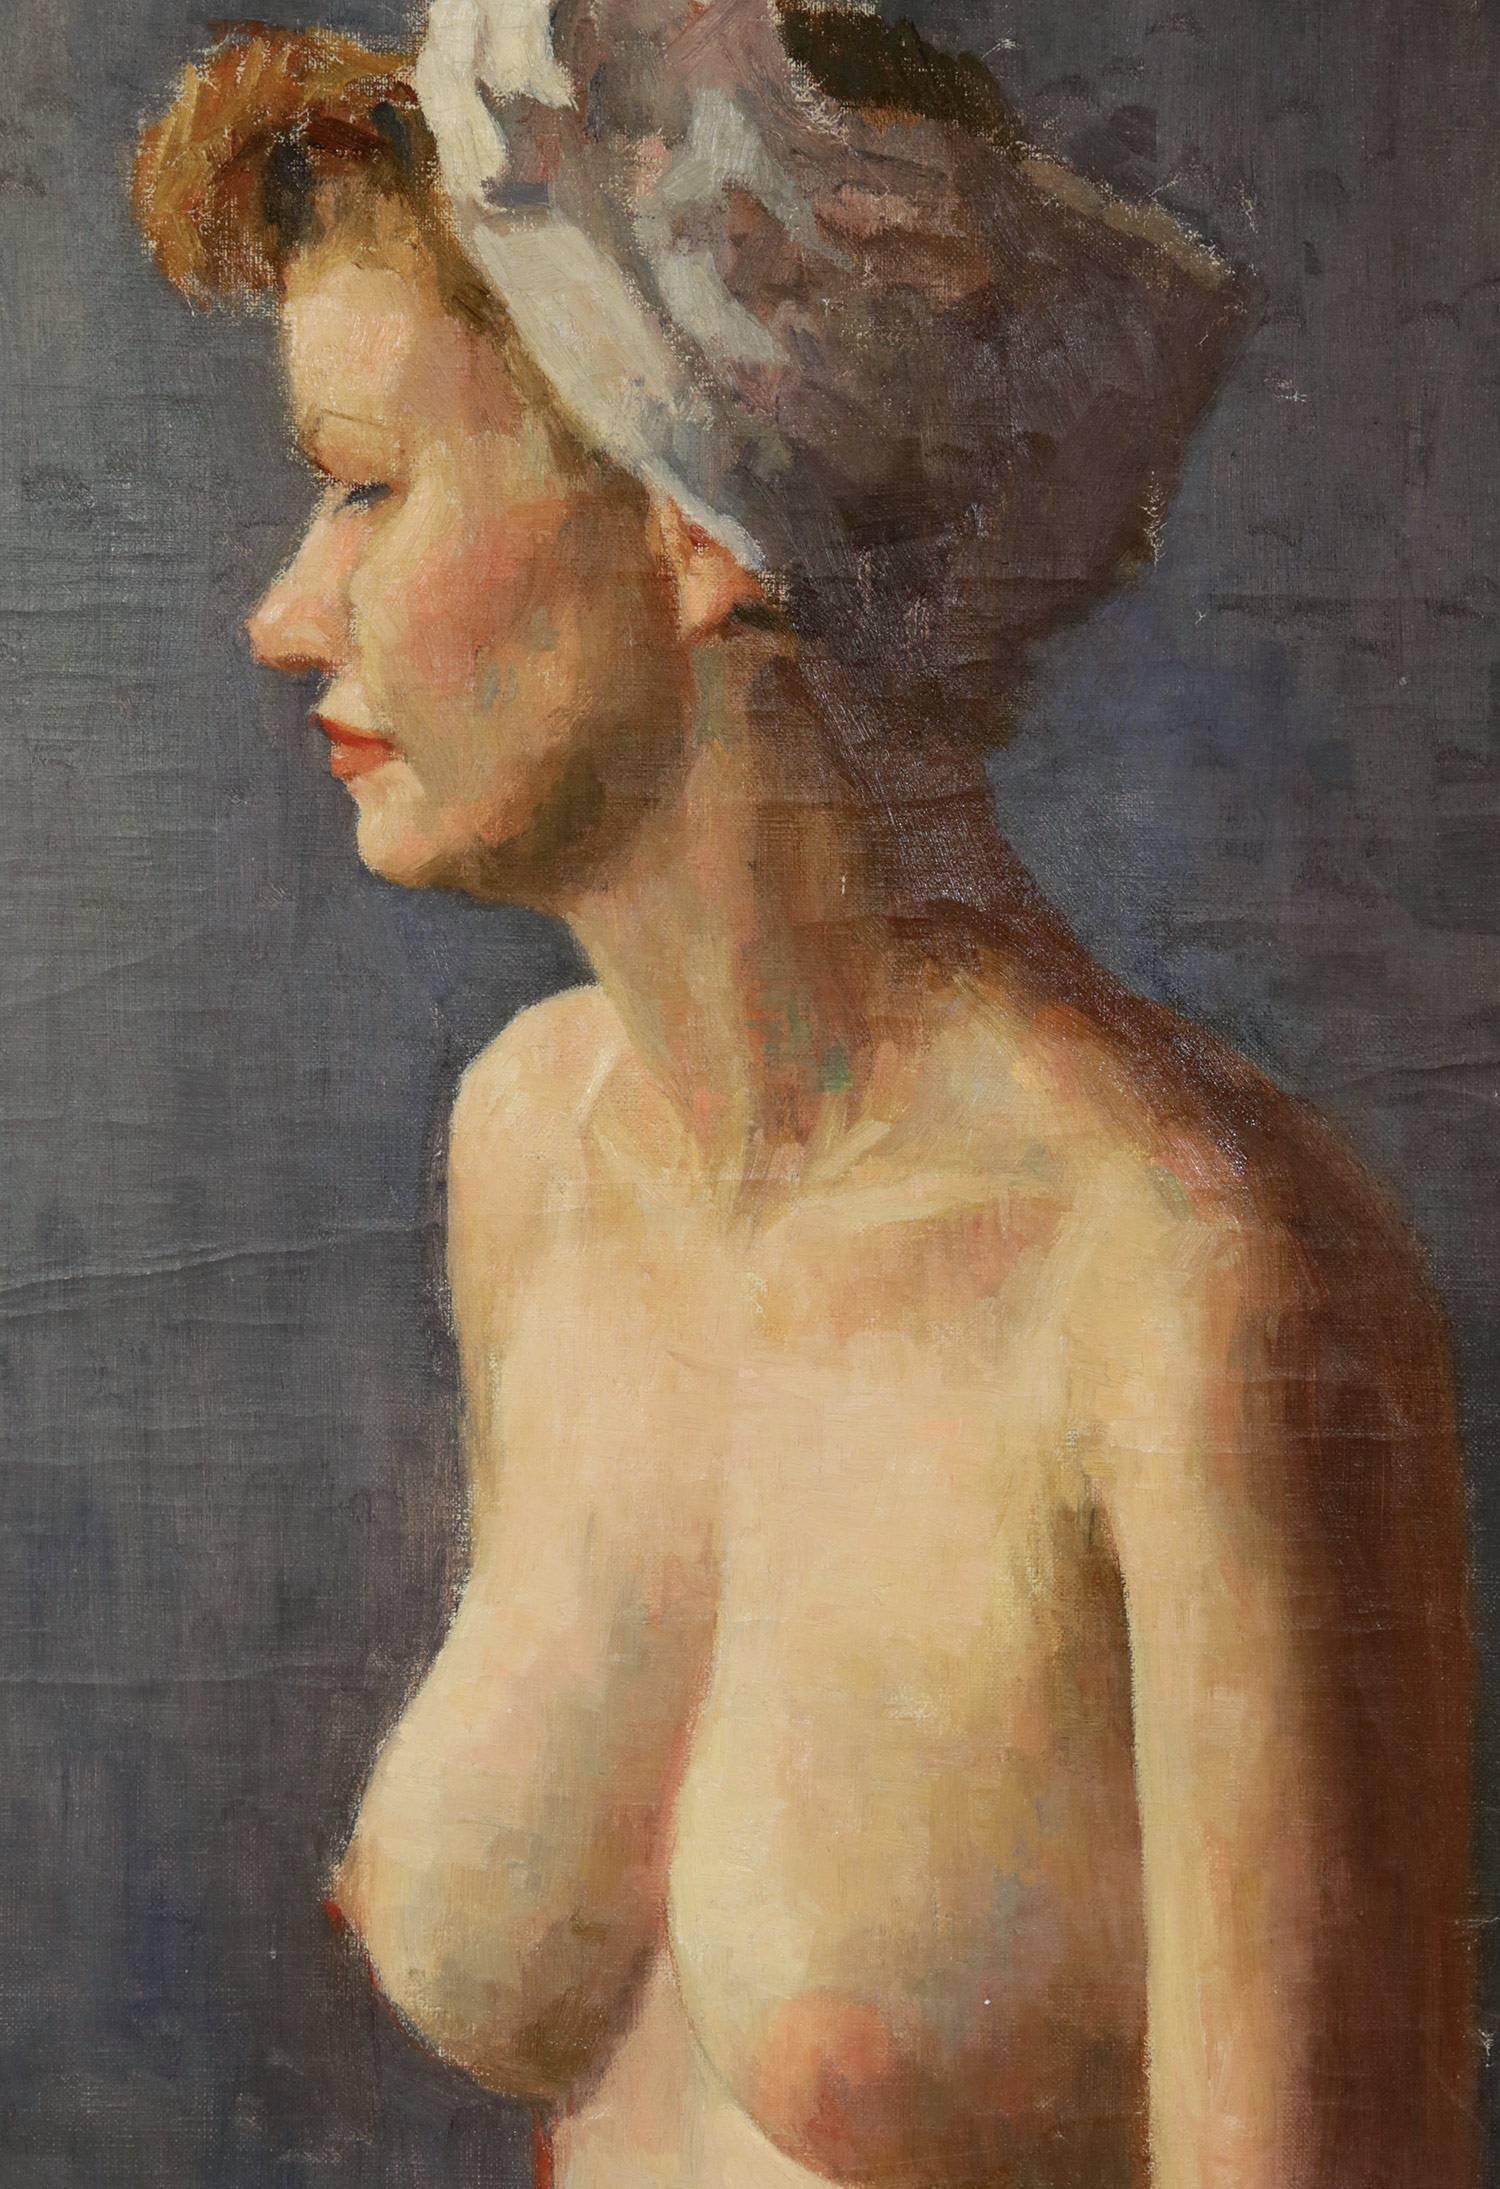 A stunning depiction of a nude woman from the mid century with thick use of paint and vibrant coloration. The model posing wears a white scarf around her head to depict the working quality of woman from the times, yet she is nude, portraying